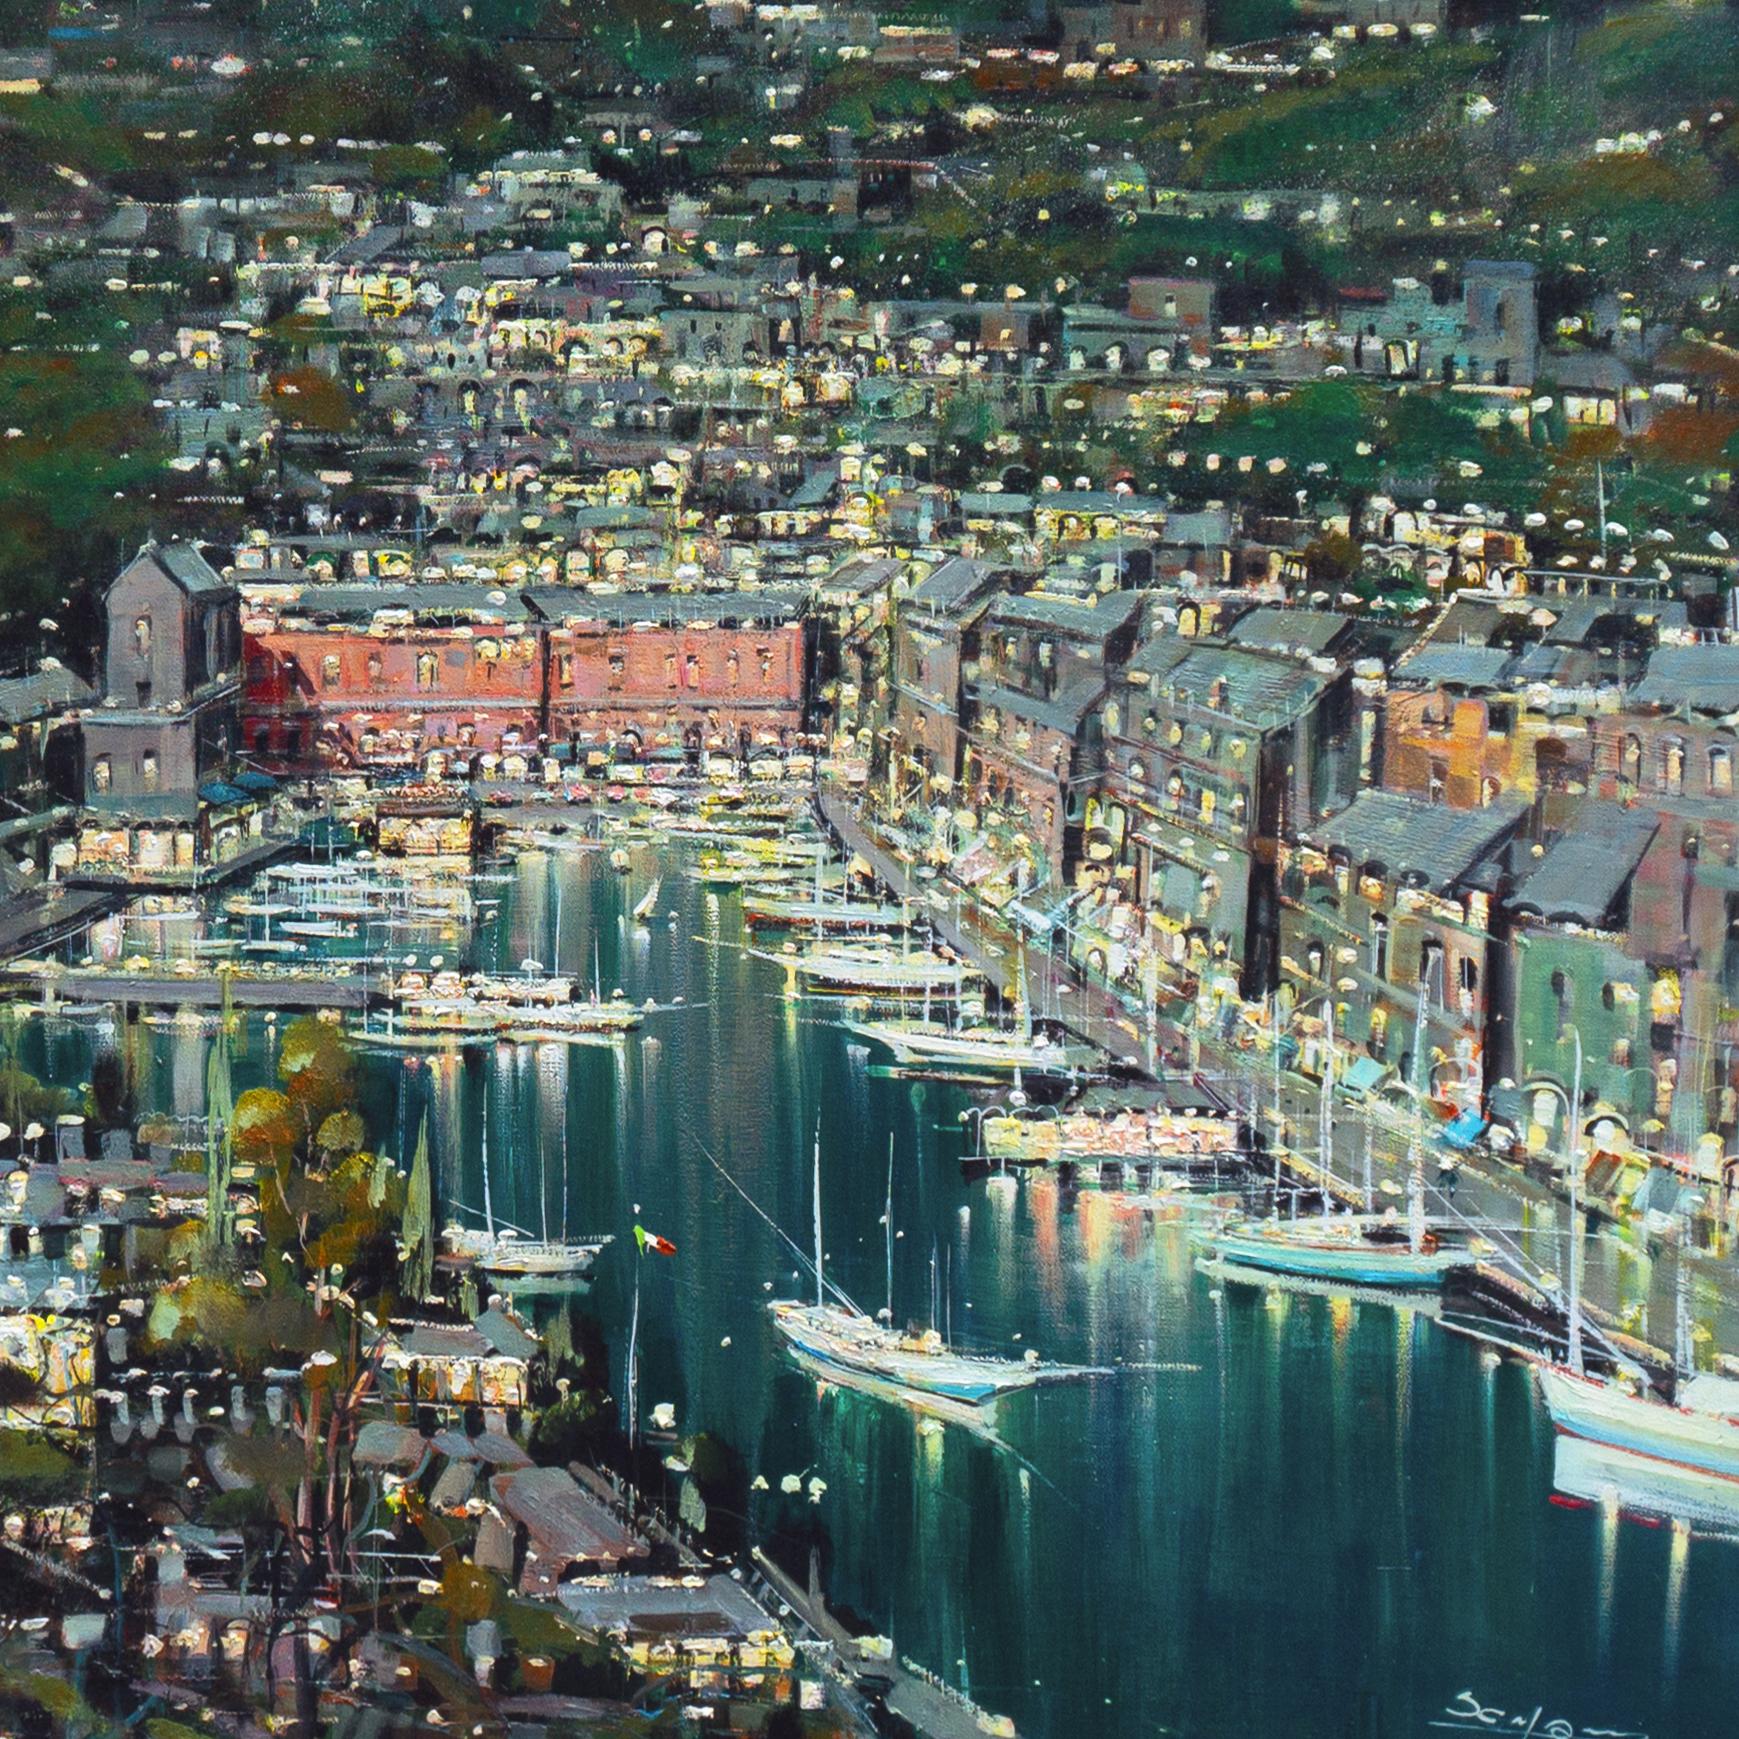 Signed lower right, 'Sanzone' for Mario Sanzone (Italian, born 1946) and titled, 'Portofino'. 

A substantial oil on canvas showing an atmospheric view of this jewel of the Italian Riviera sparkling with night-time lights.

Born in Naples in 1946,